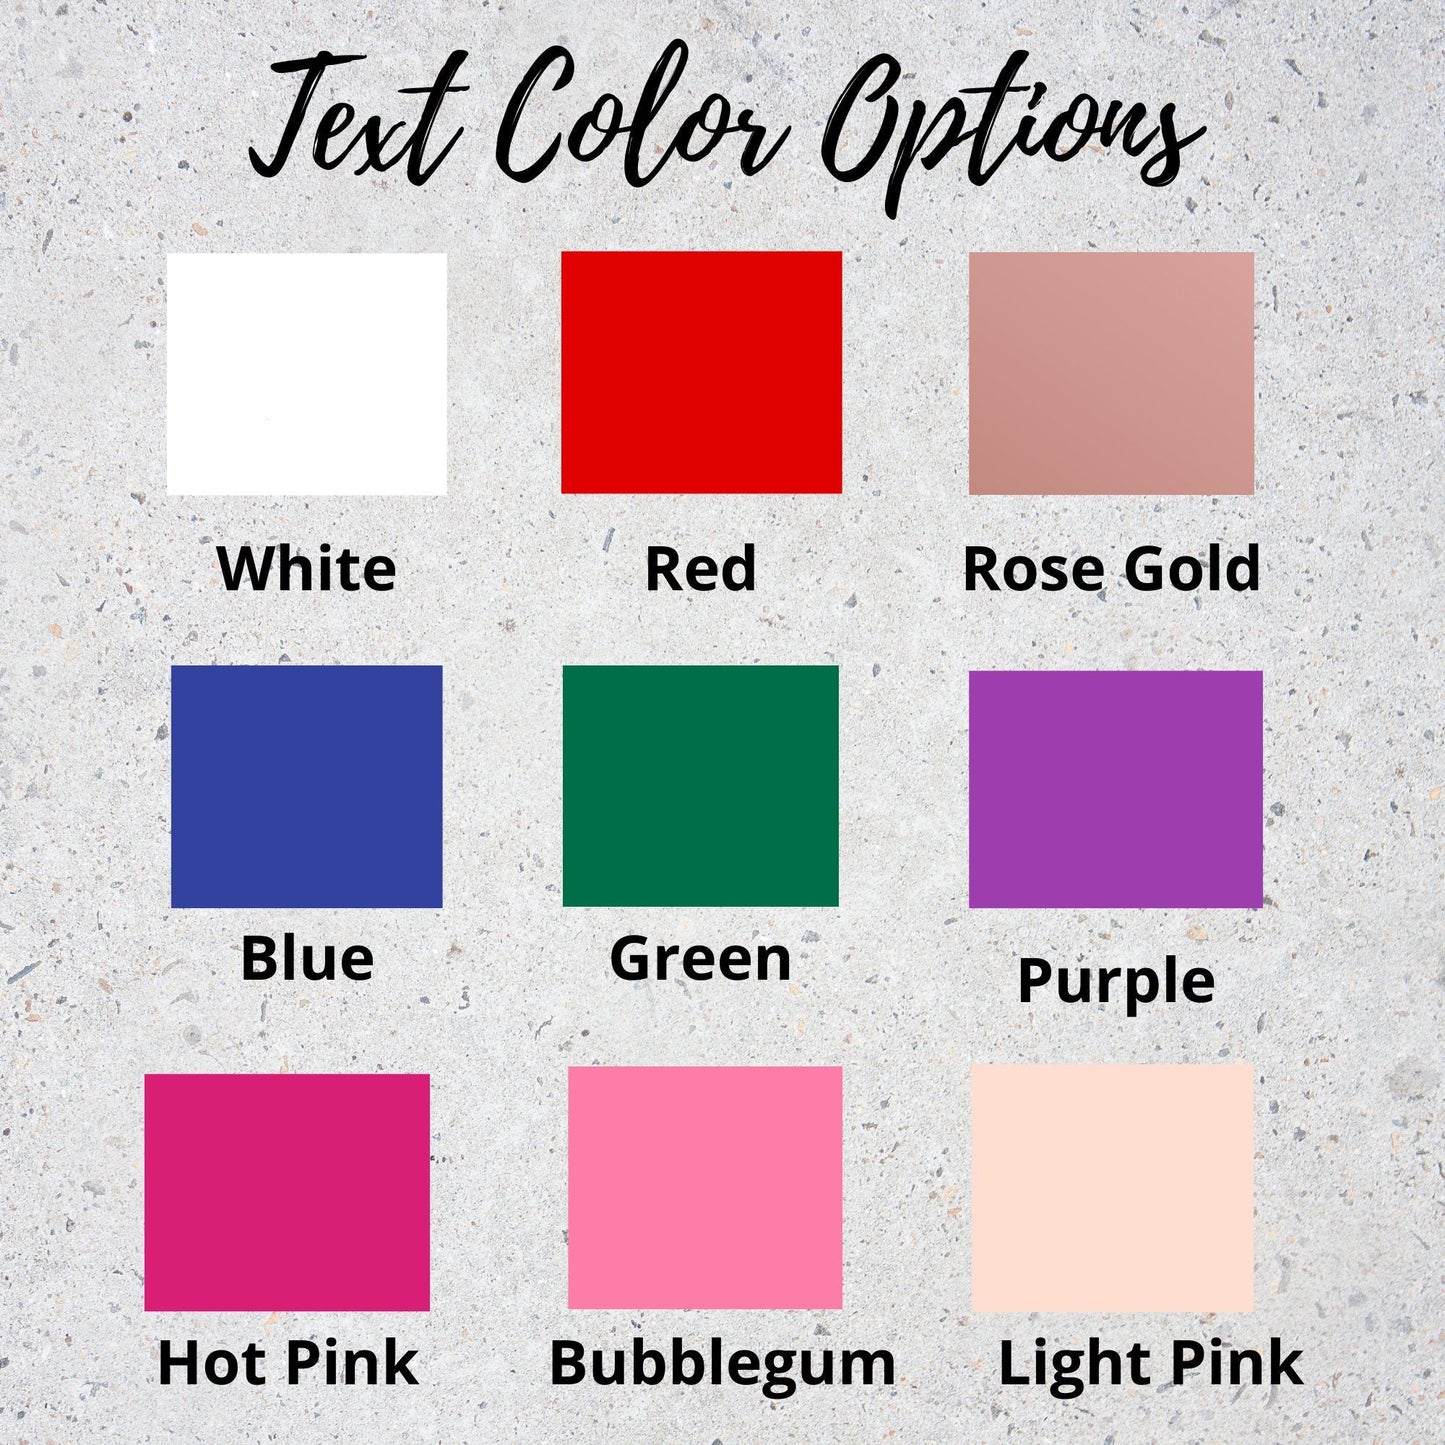 Thong Text Color Options